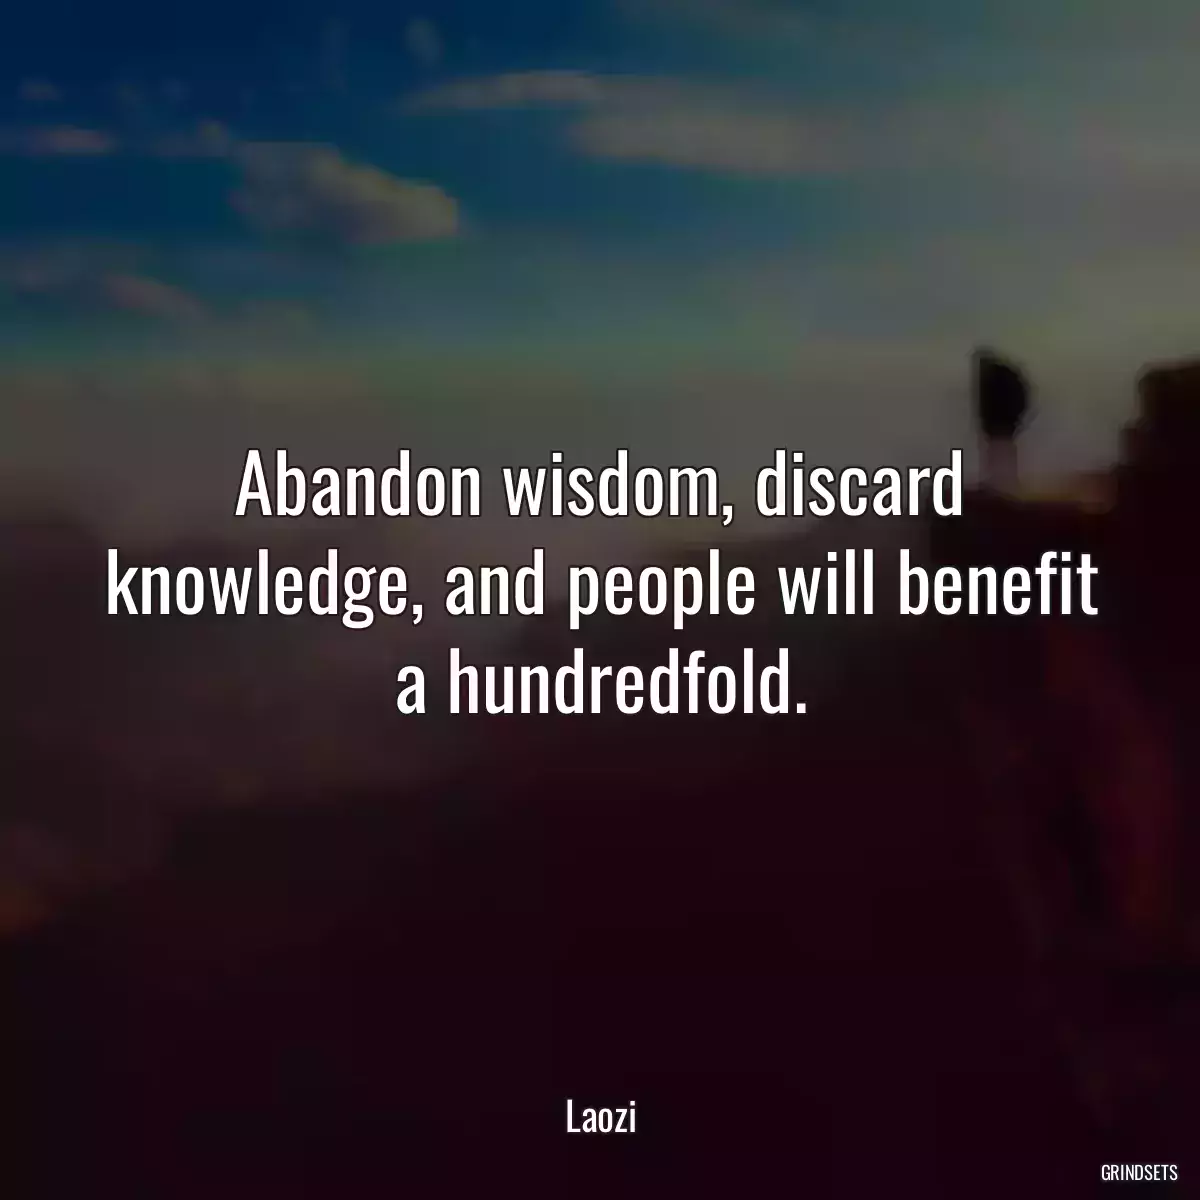 Abandon wisdom, discard knowledge, and people will benefit a hundredfold.